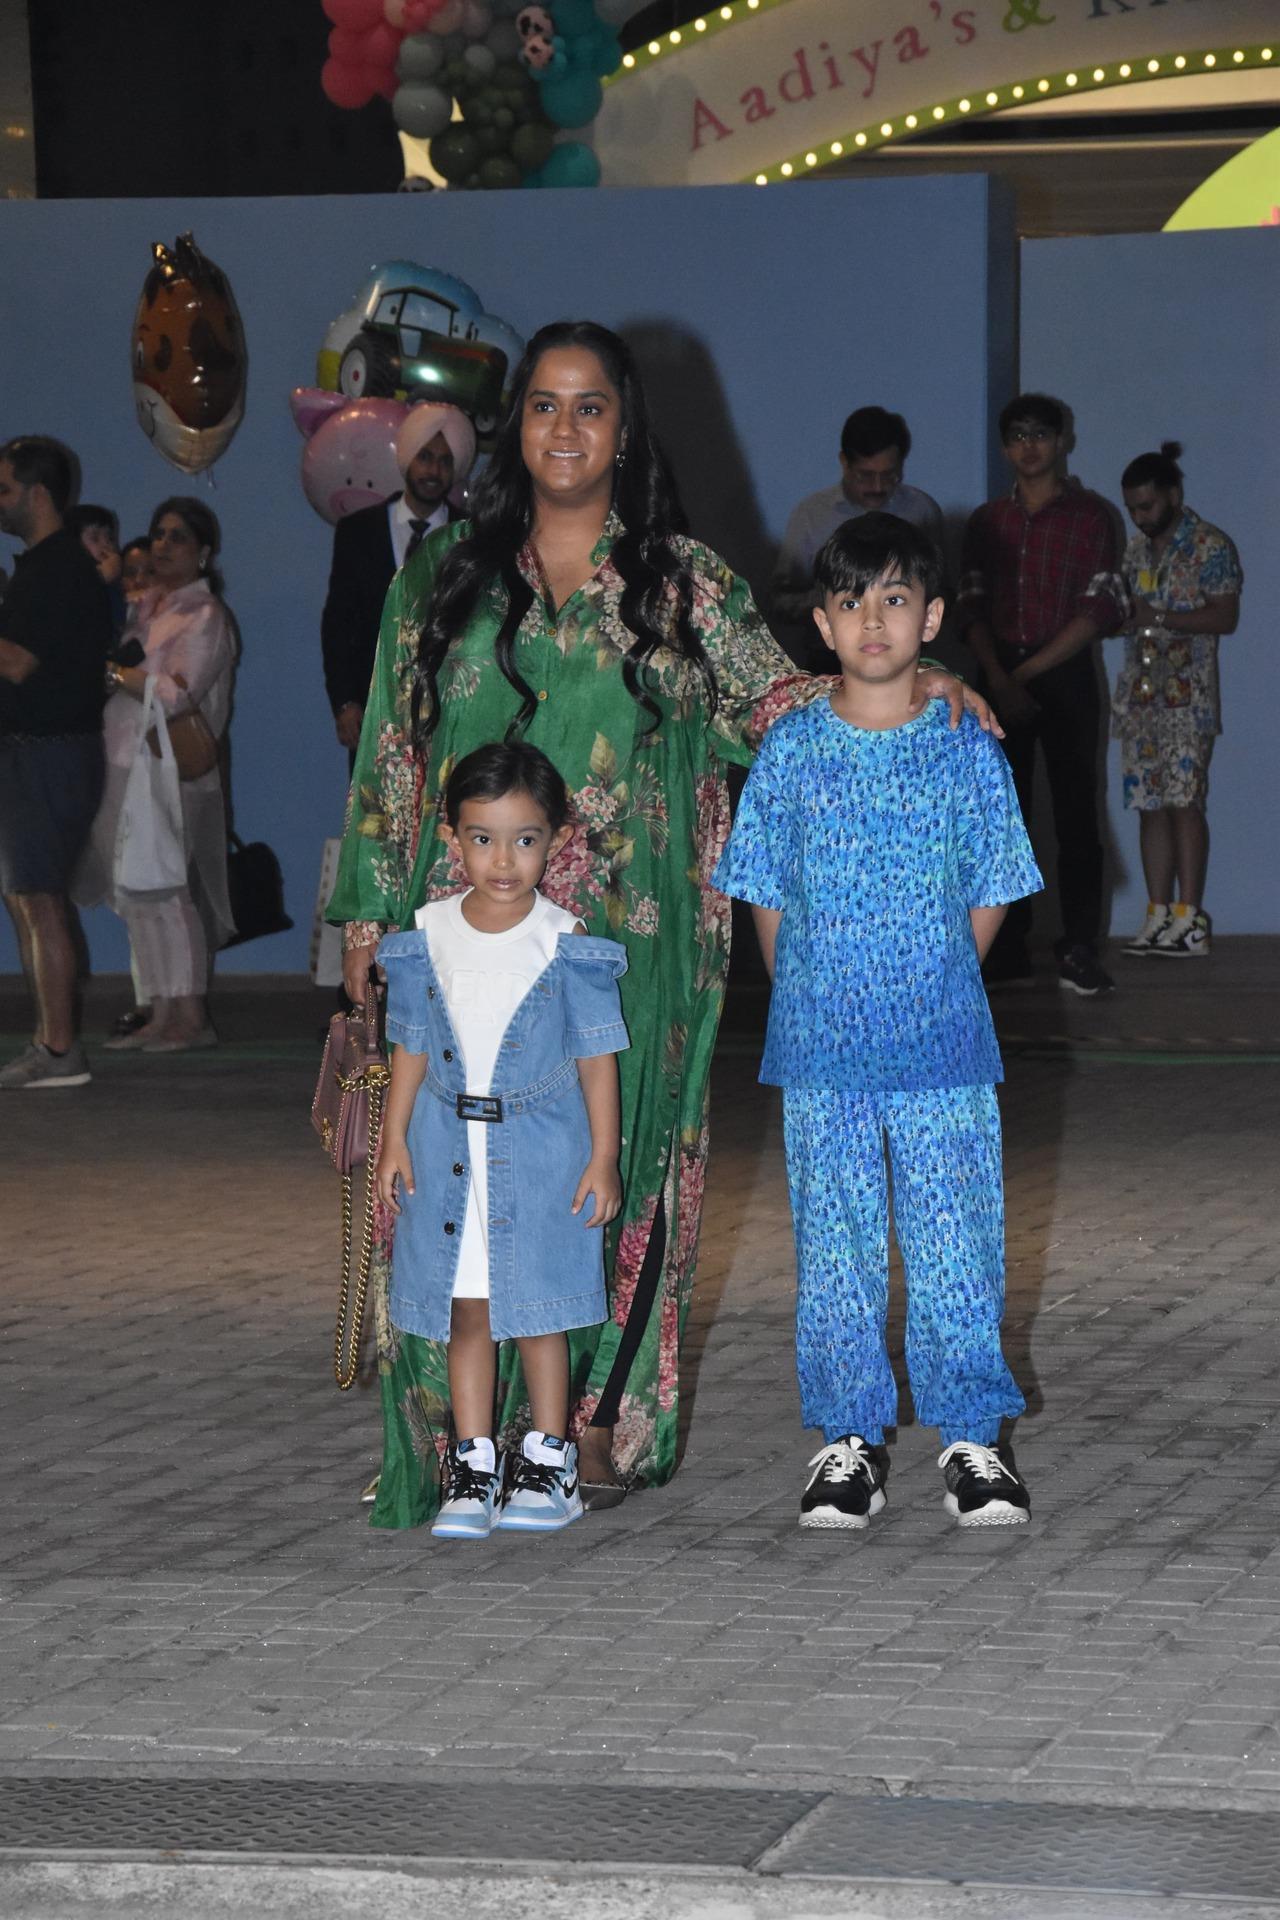 Arpita Khan Sharma attended the party with her kids, Ahil and Ayat